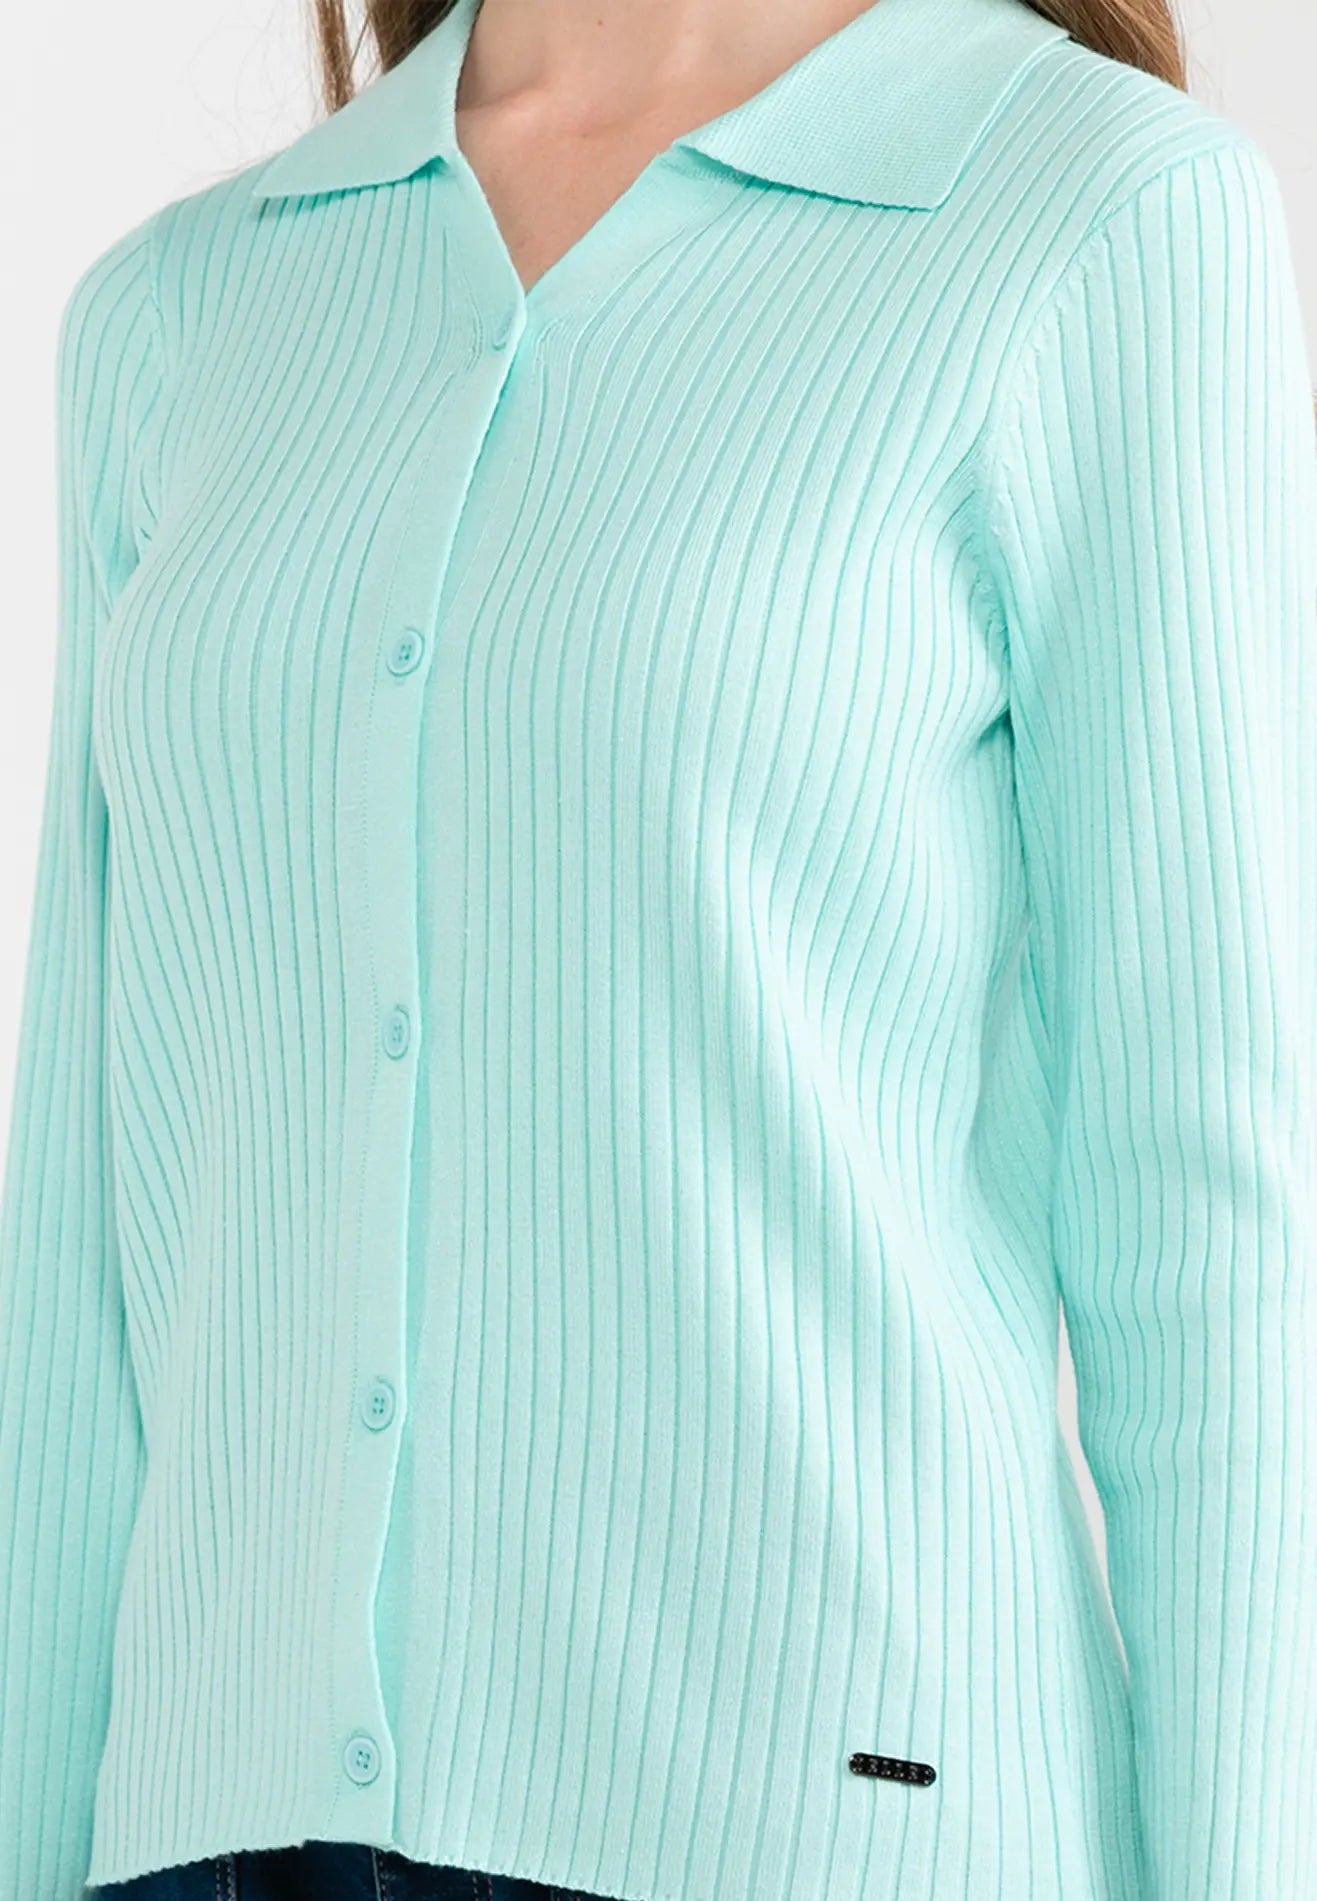 ELLE Apparel Collared Button Up Knit Top